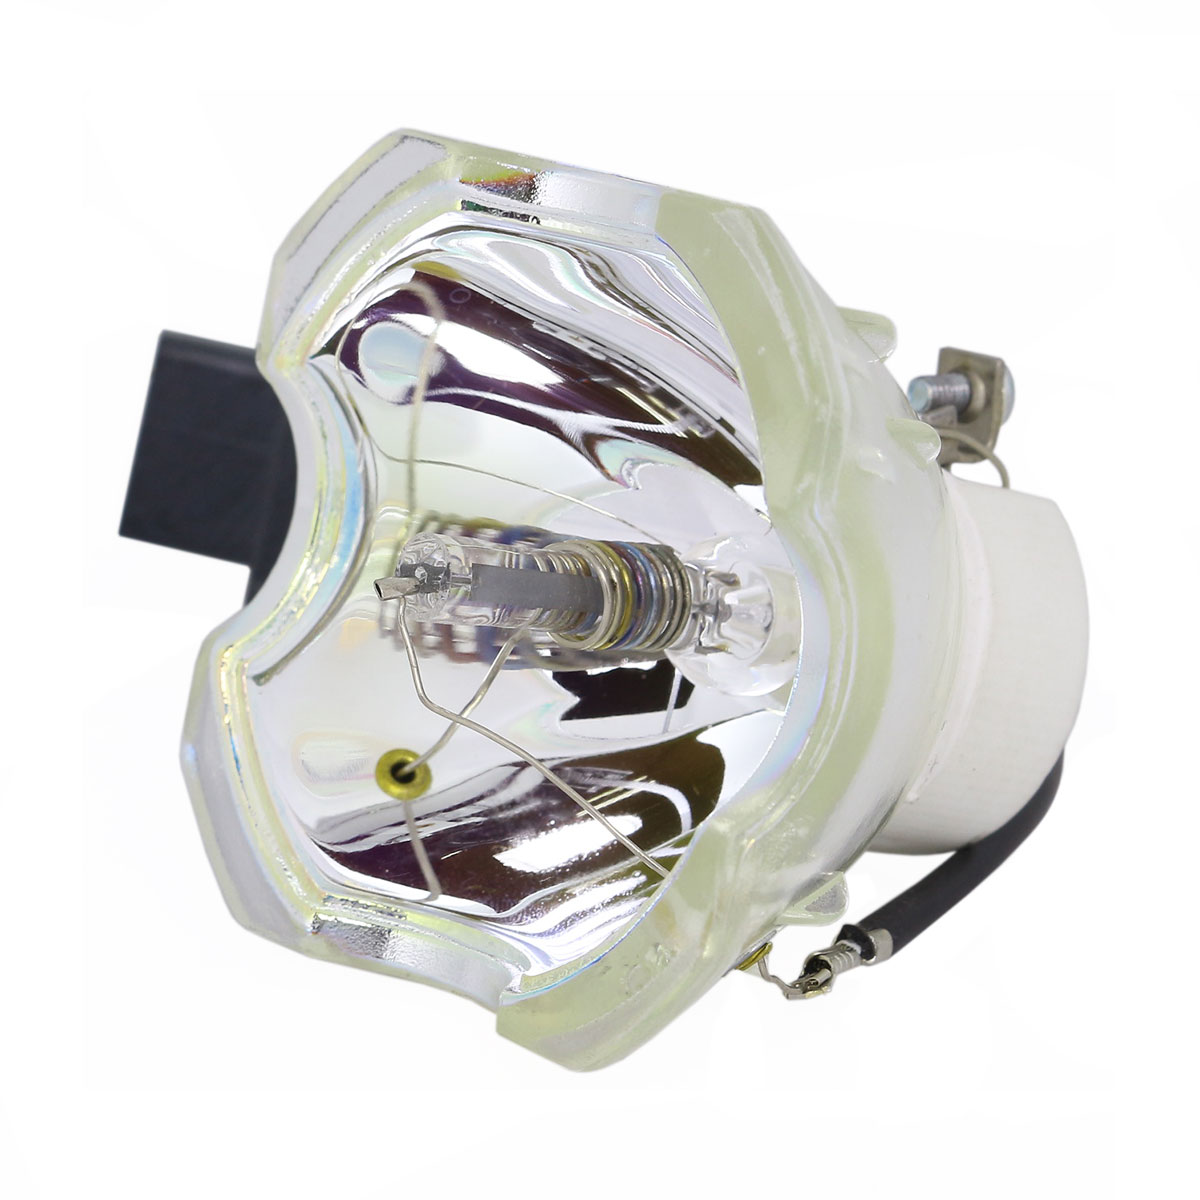 Lutema Economy Bulb for InFocus SP-LAMP-046 Projector (Lamp Only) - image 1 of 6